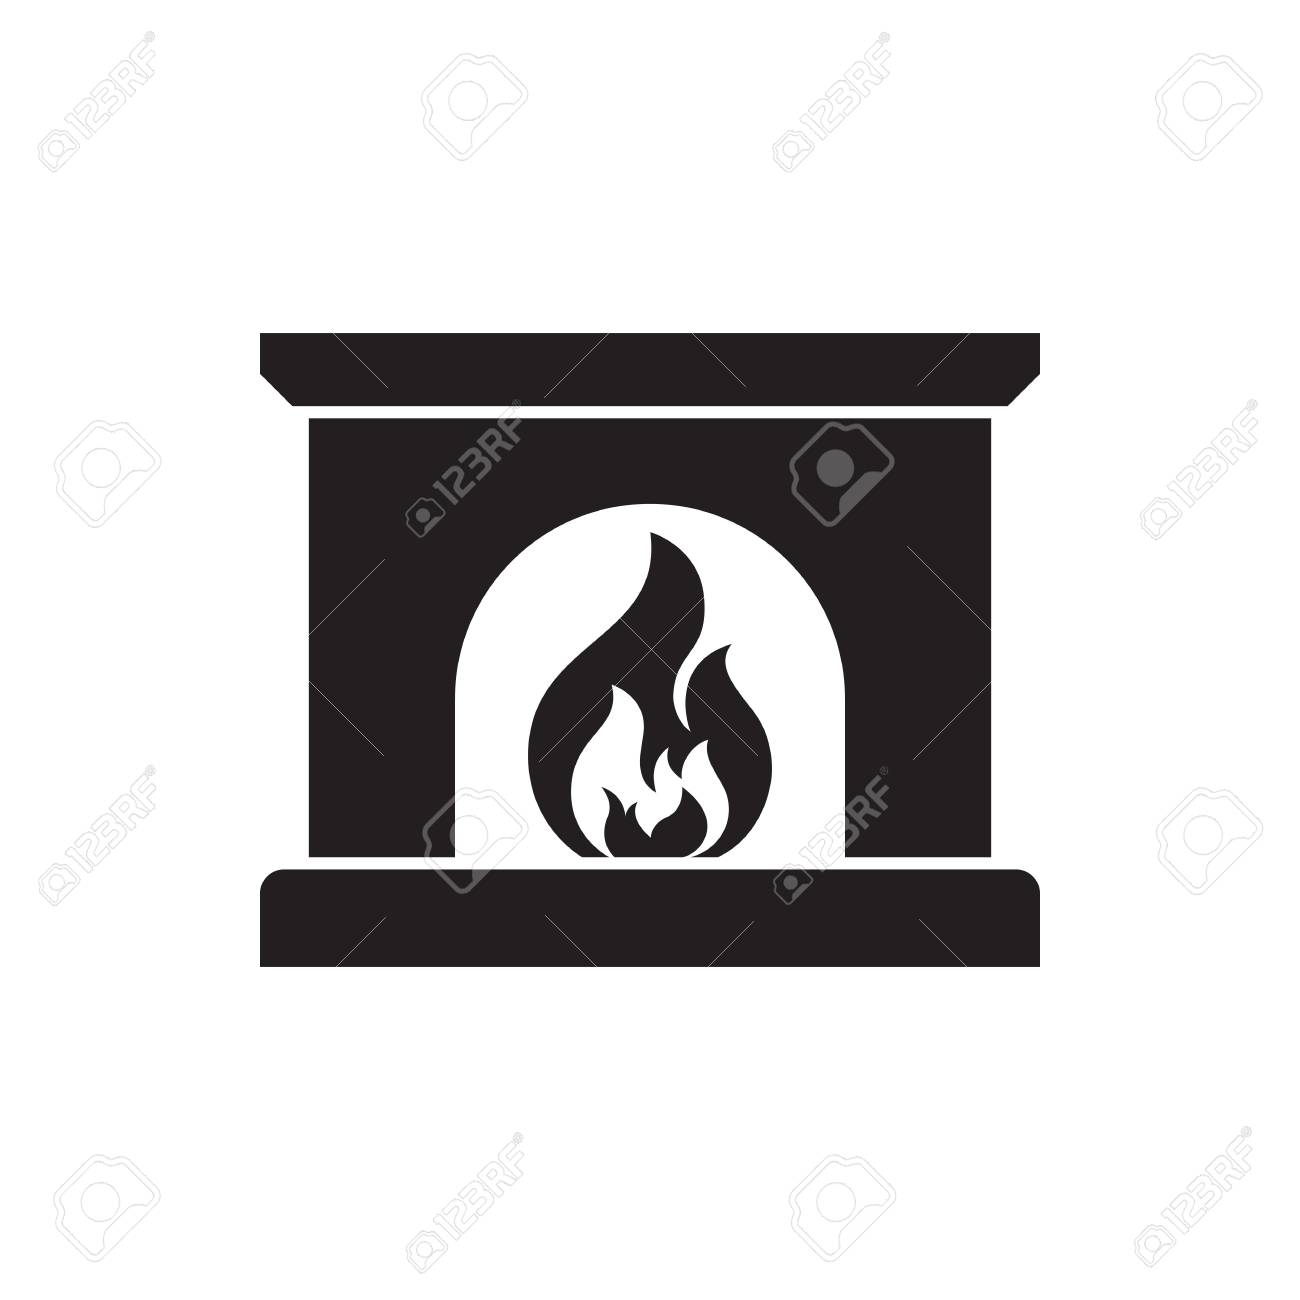 Fireplace - Free furniture and household icons